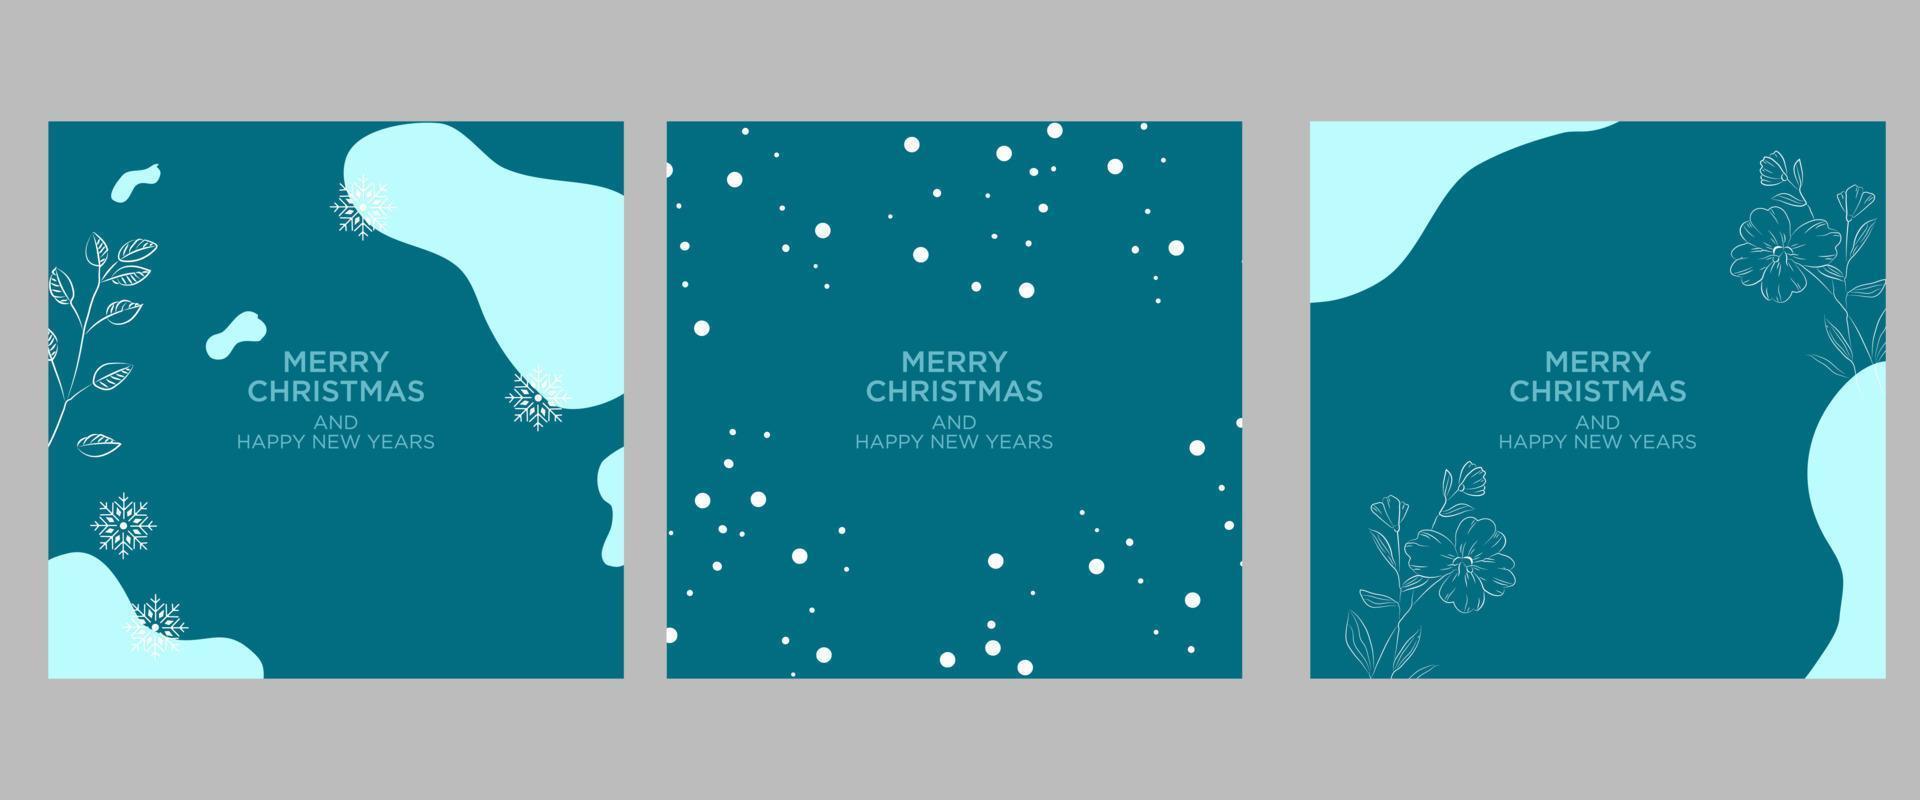 Merry Christmas greeting card. Trendy square Winter Holiday art template. Suitable for social media posts, mobile apps, banner designs and web internet advertising. Vector fashion background